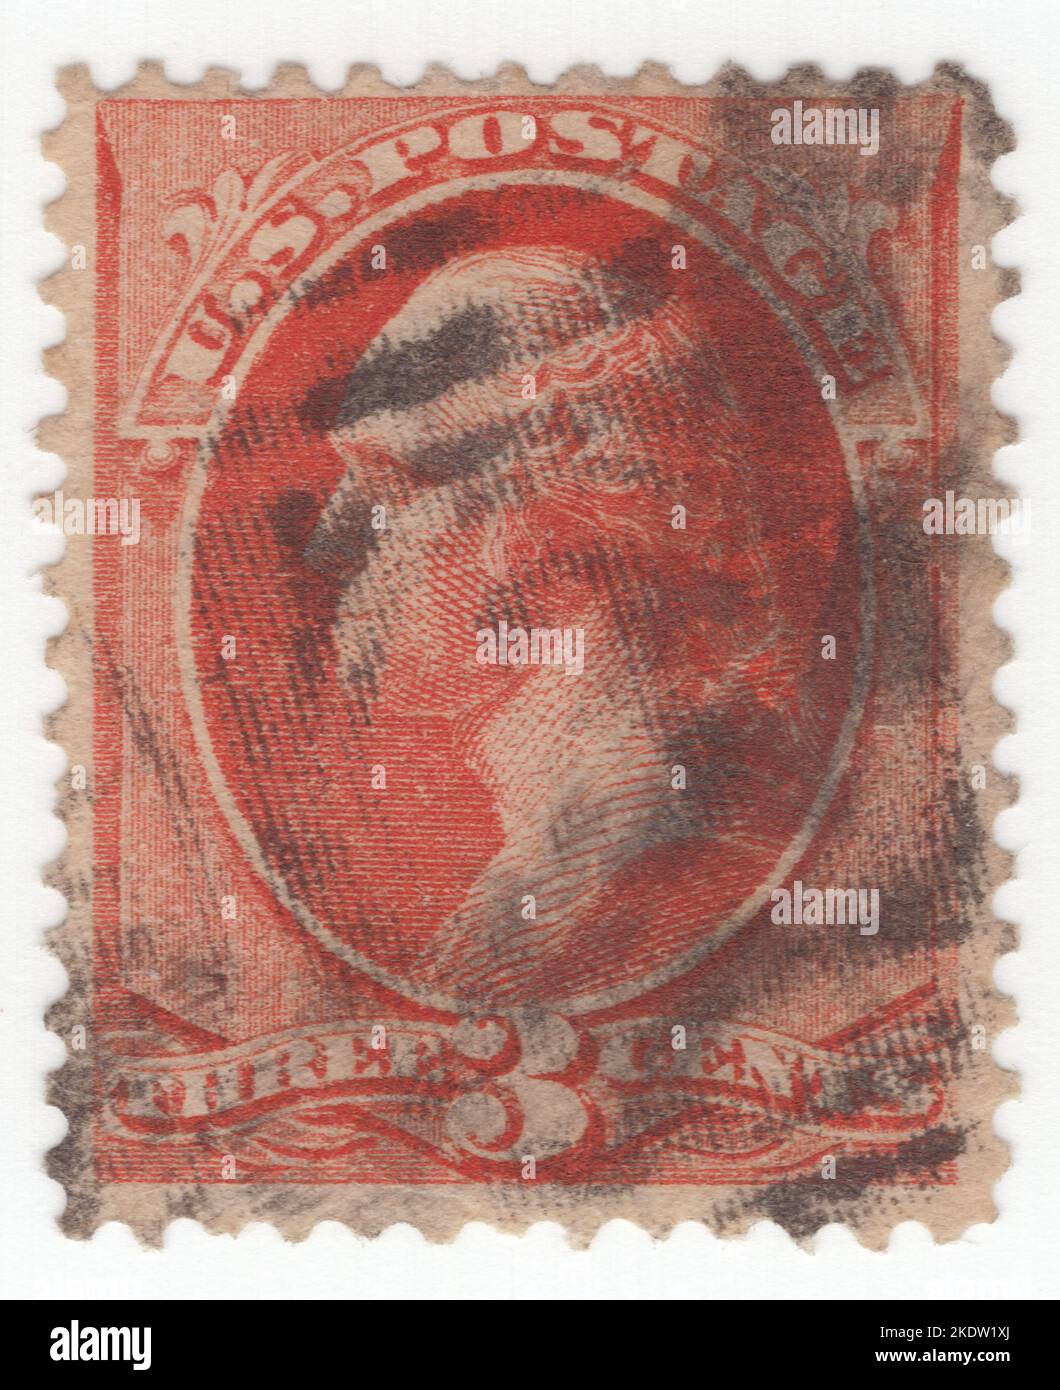 USA - 1887: An 3 cents vermilion postage stamp depicting portrait of George Washington. American military officer, statesman, and Founding Father who served as the first president of the United States from 1789 to 1797. Appointed by the Continental Congress as commander of the Continental Army, Washington led the Patriot forces to victory in the American Revolutionary War and served as the president of the Constitutional Convention of 1787, which created the Constitution of the United States and the American federal government. Washington has been called the 'Father of his Country' Stock Photo